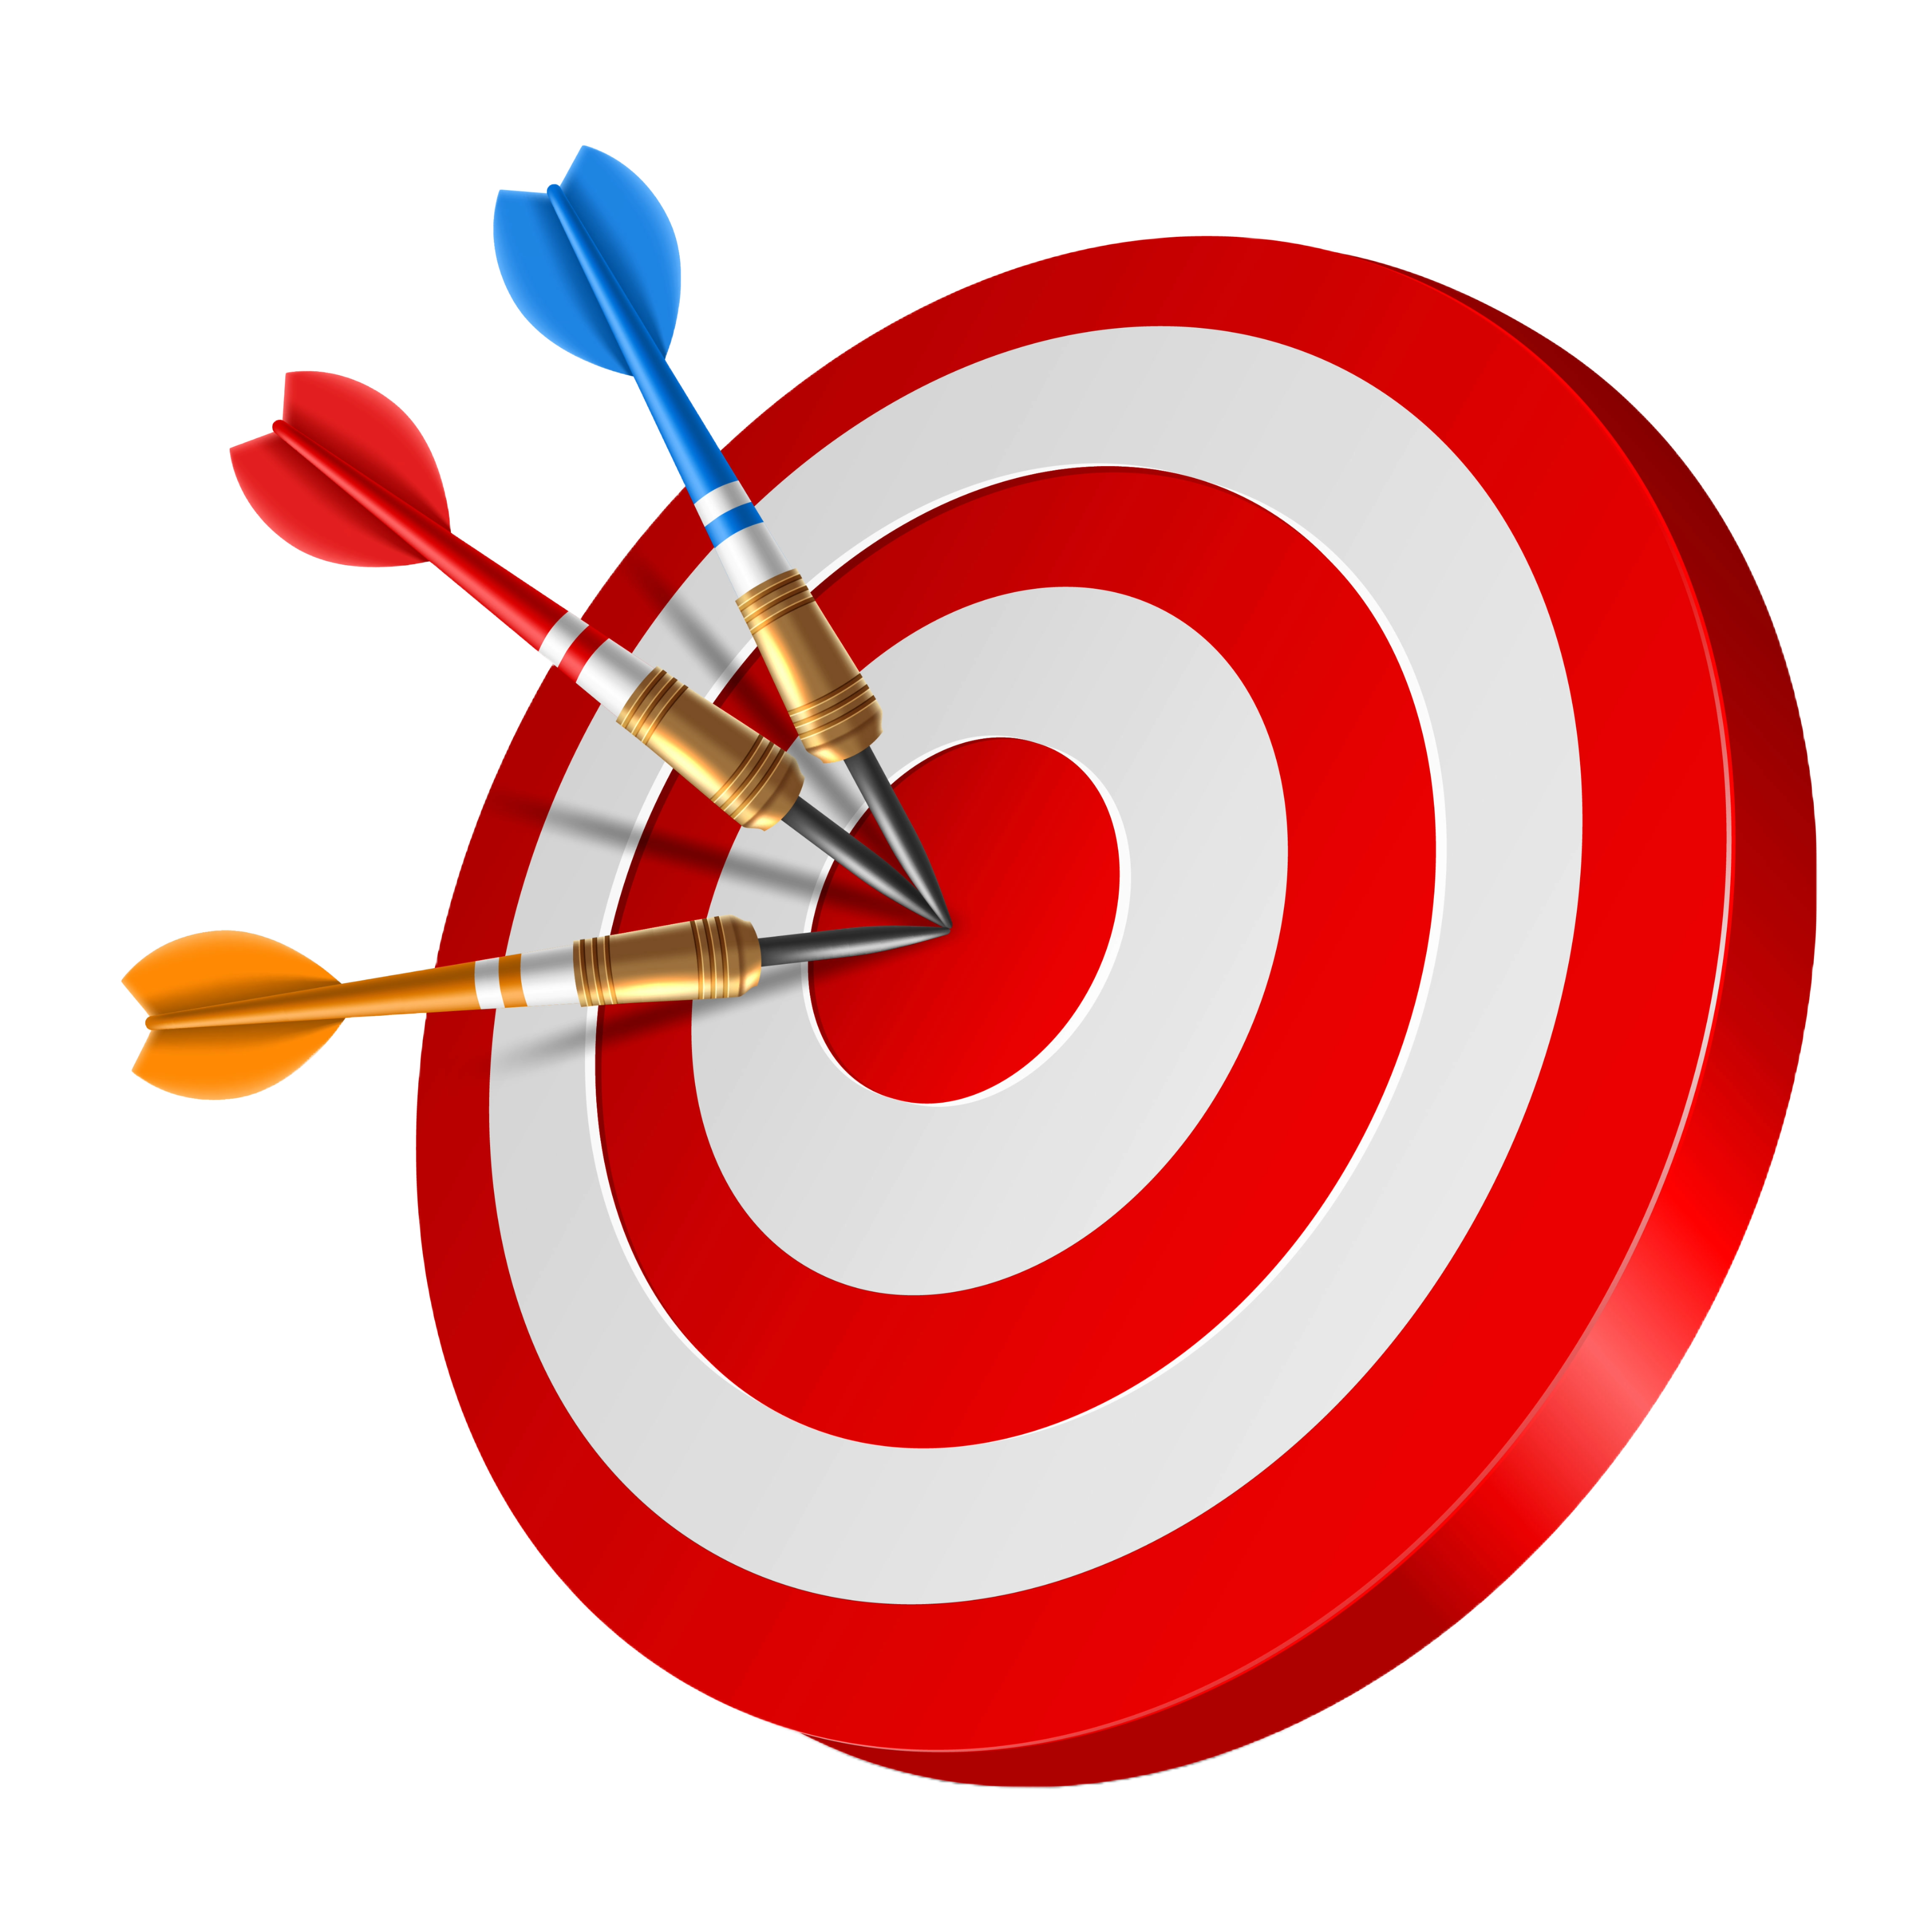 Three darts hit bullseye on target, symbolizing our mission's precision and success.